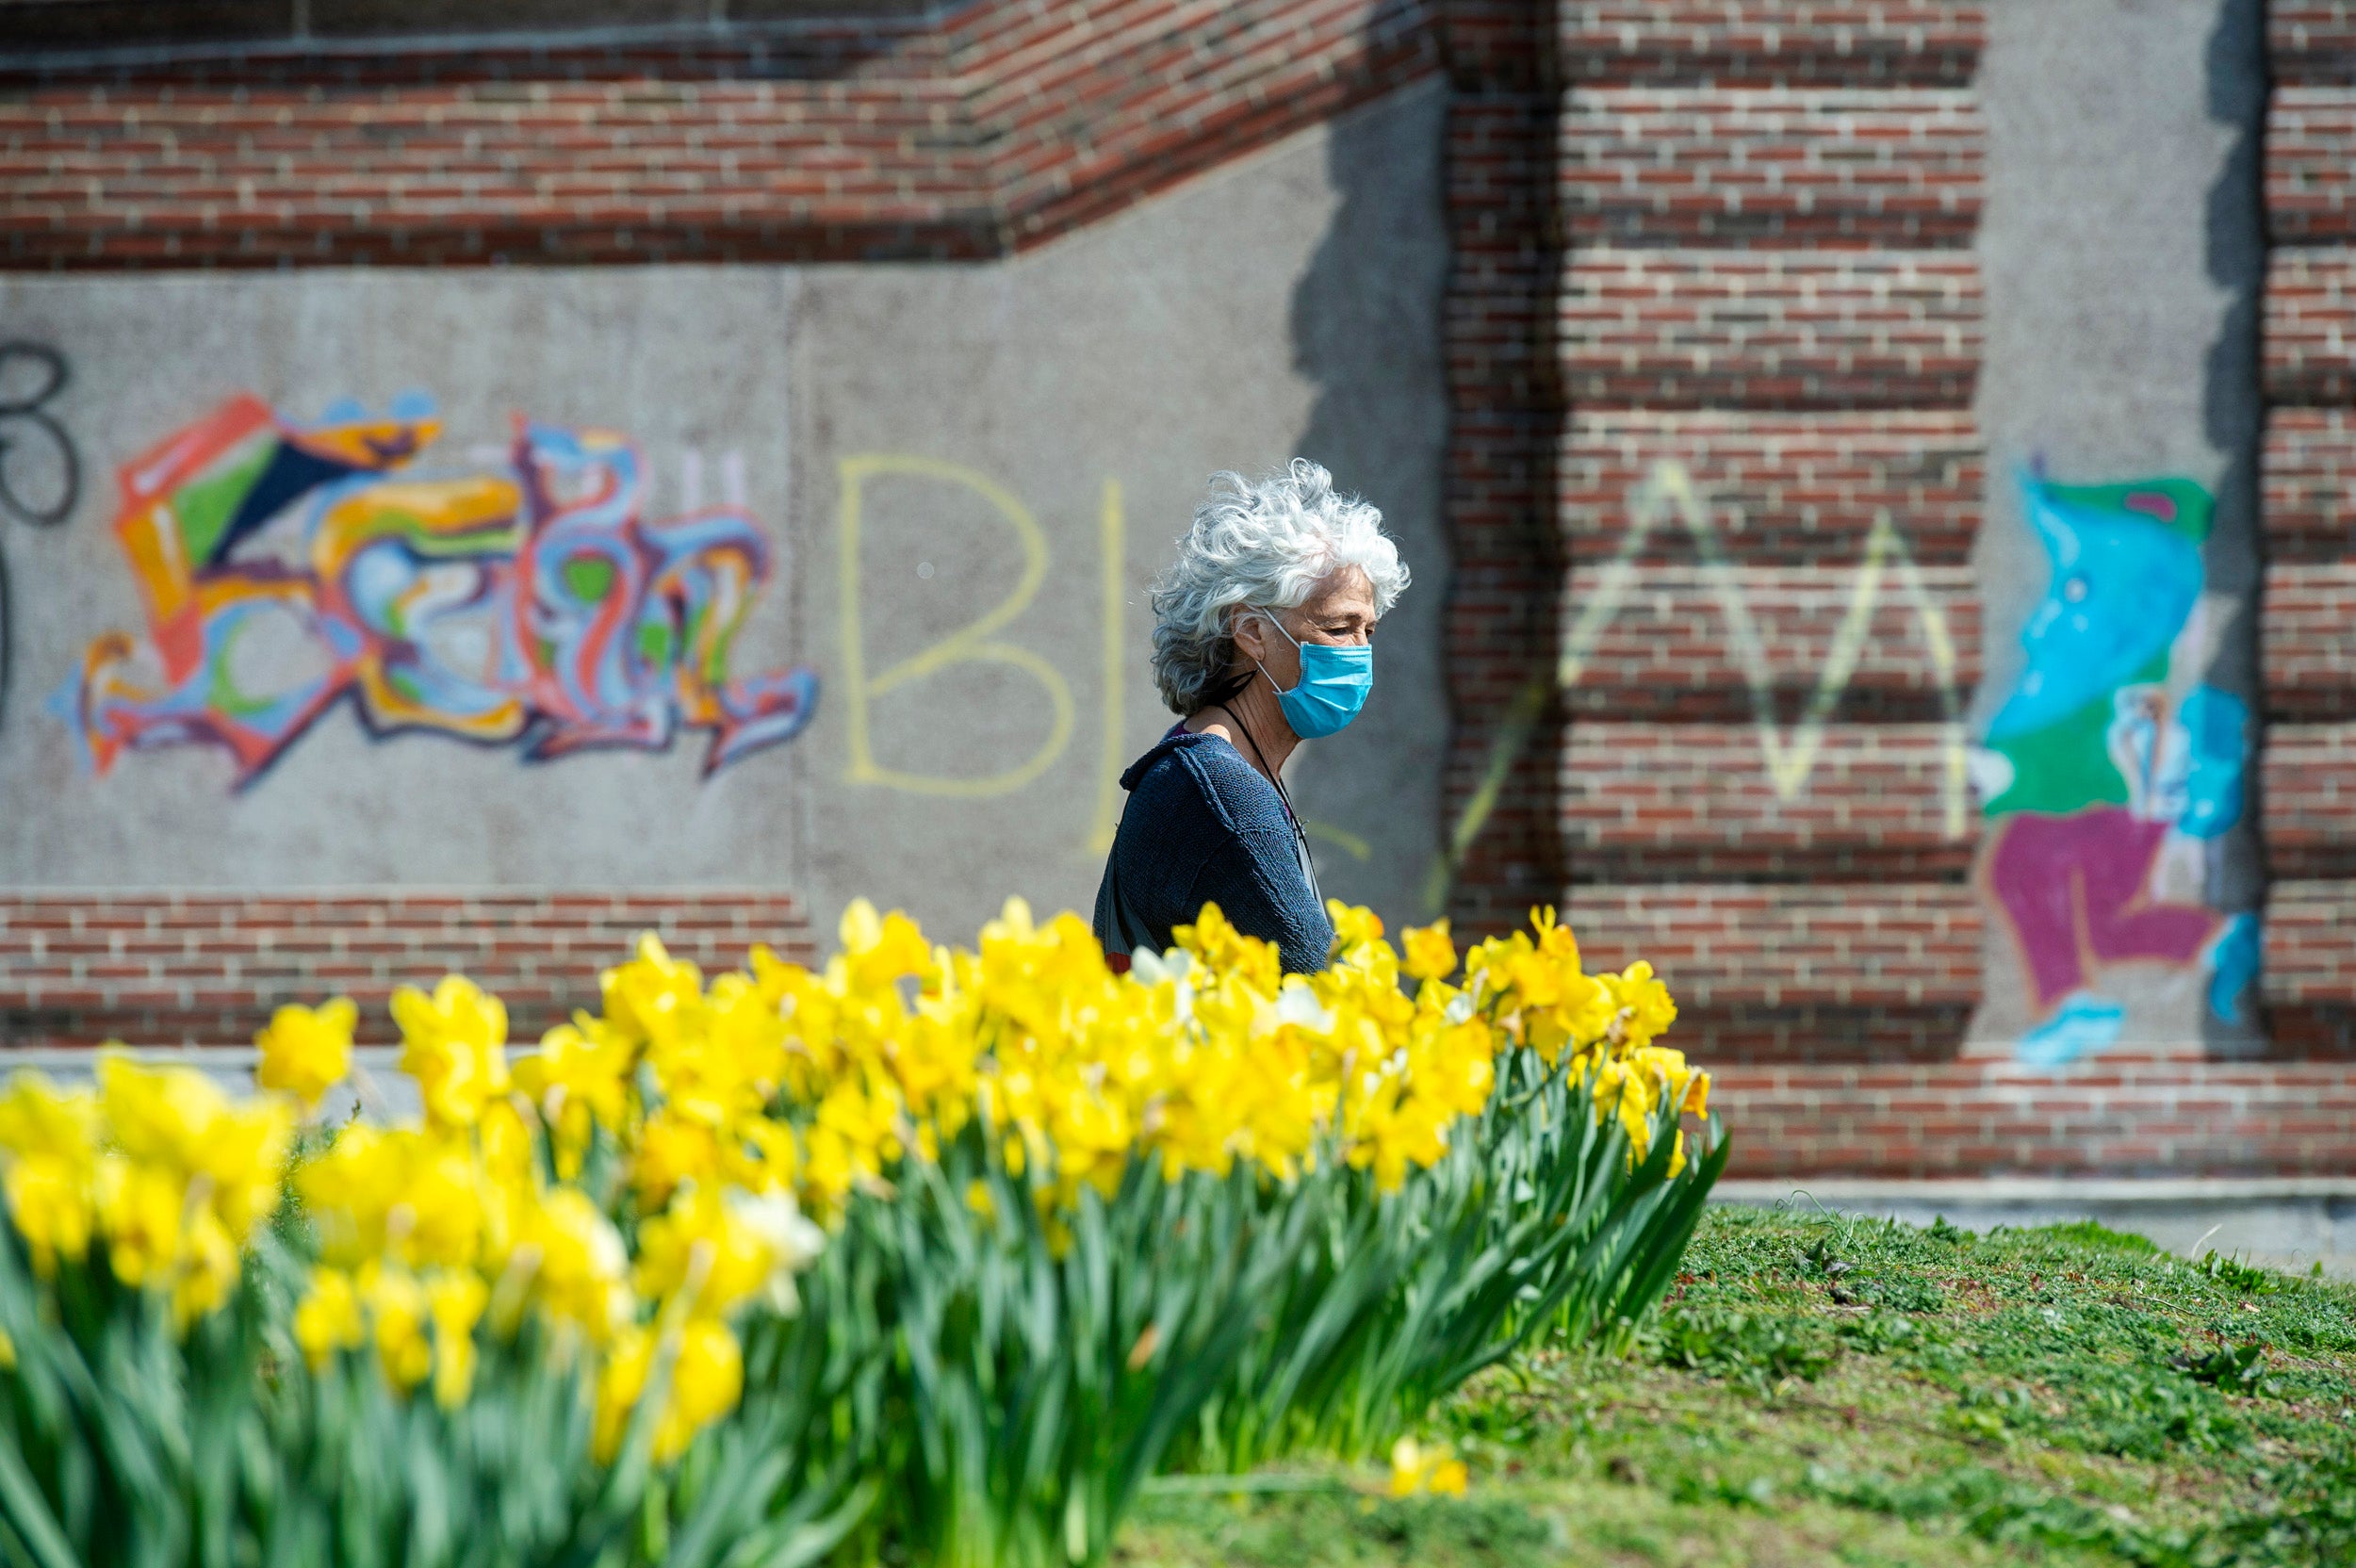 Cambridge resident Amy Rugel soaks up some sun by a row of daffodils at the Anderson Memorial Bridge.